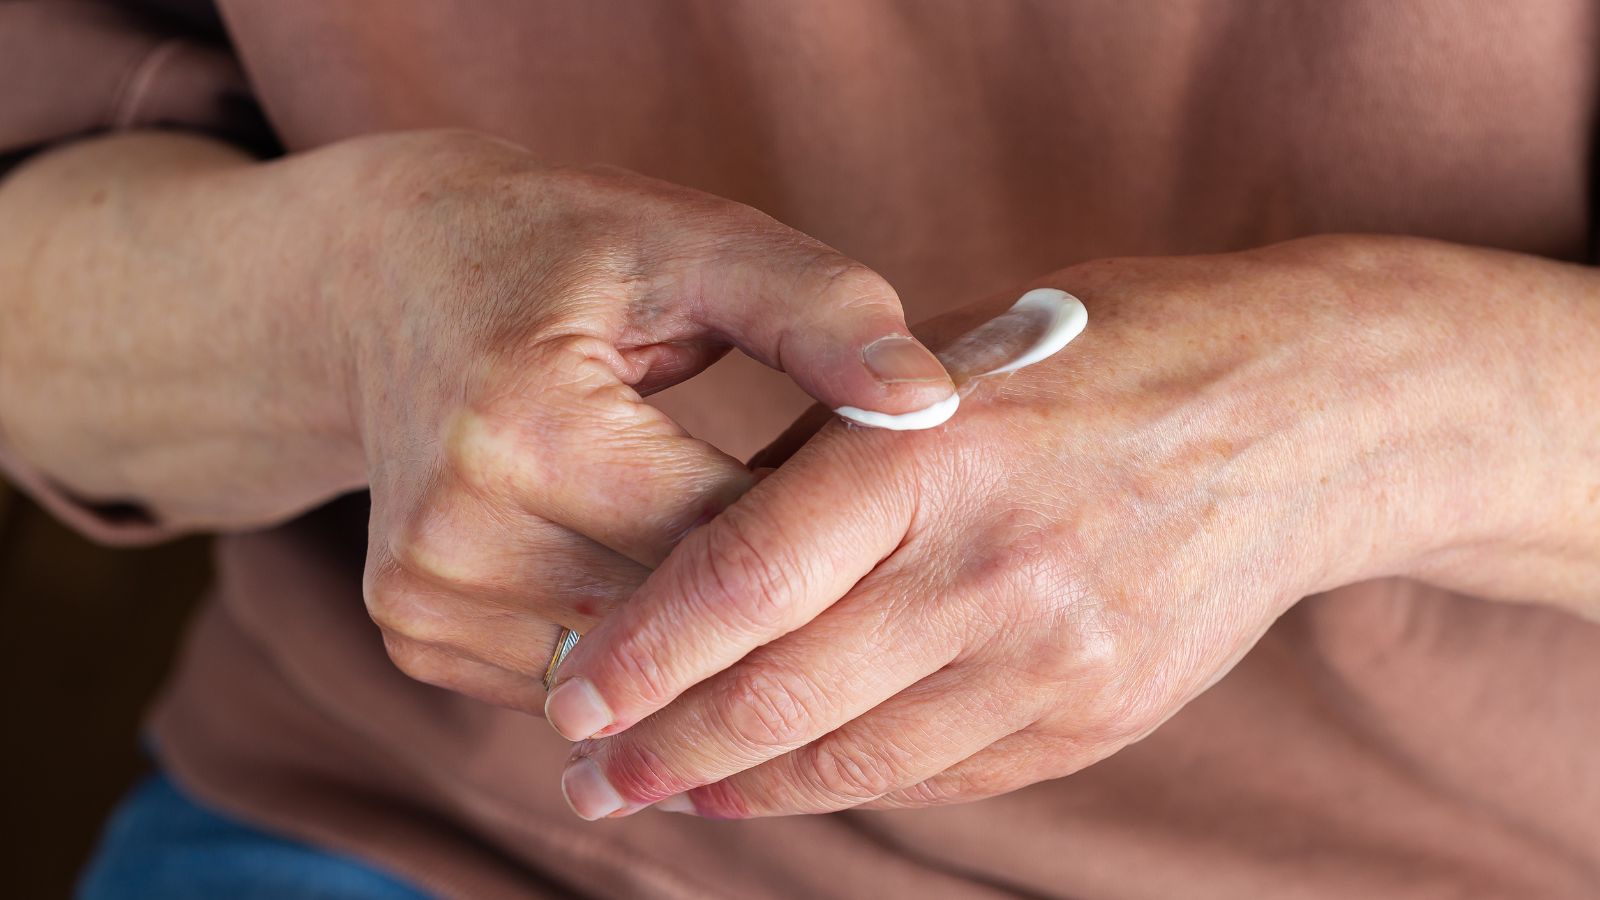 Person applying greenway biotech magnesium cream to palm of hand